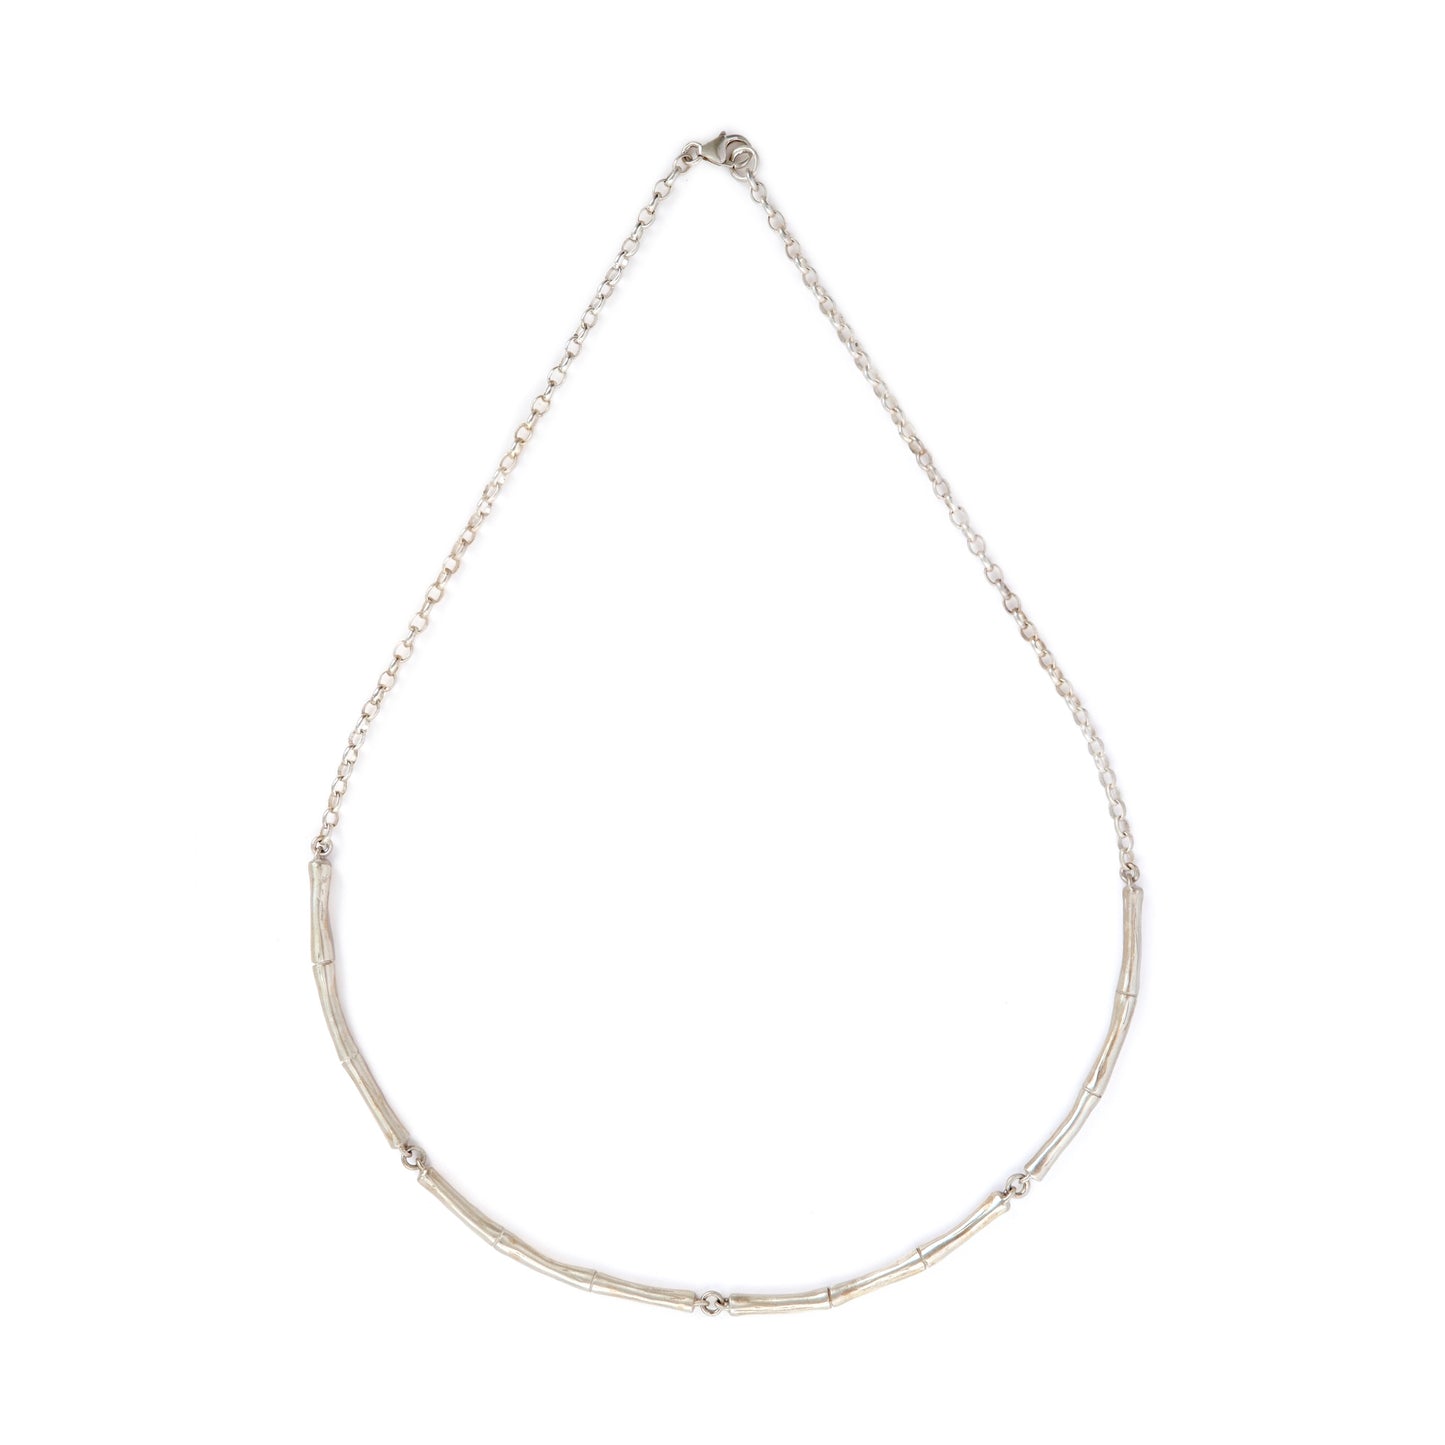 bamboo bar necklace in Sterling silver